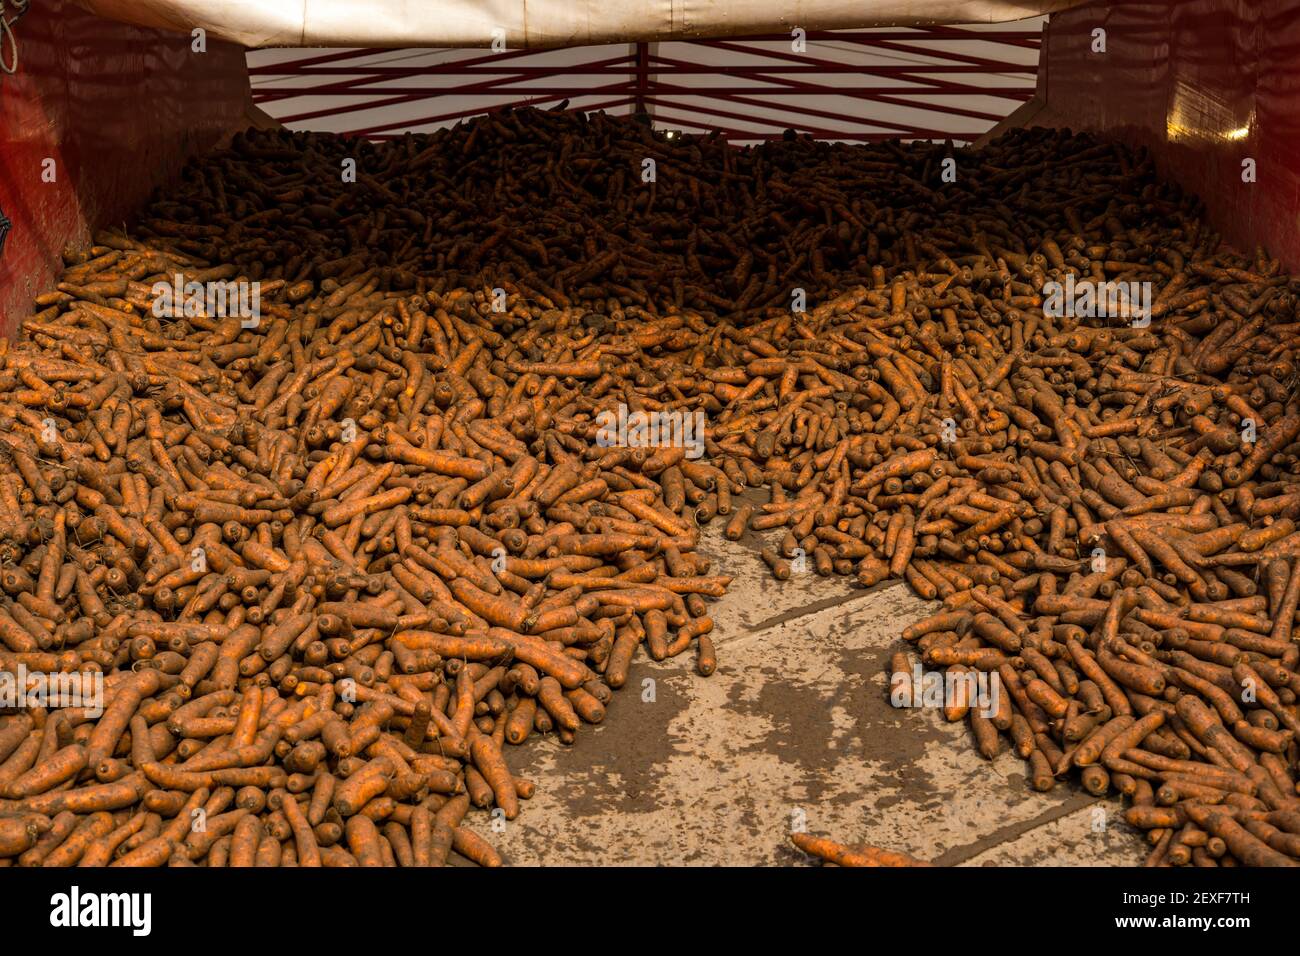 Carrots in agricultural machinery during harvest at Luffness Mains Farm, East Lothian, Scotland, UK Stock Photo